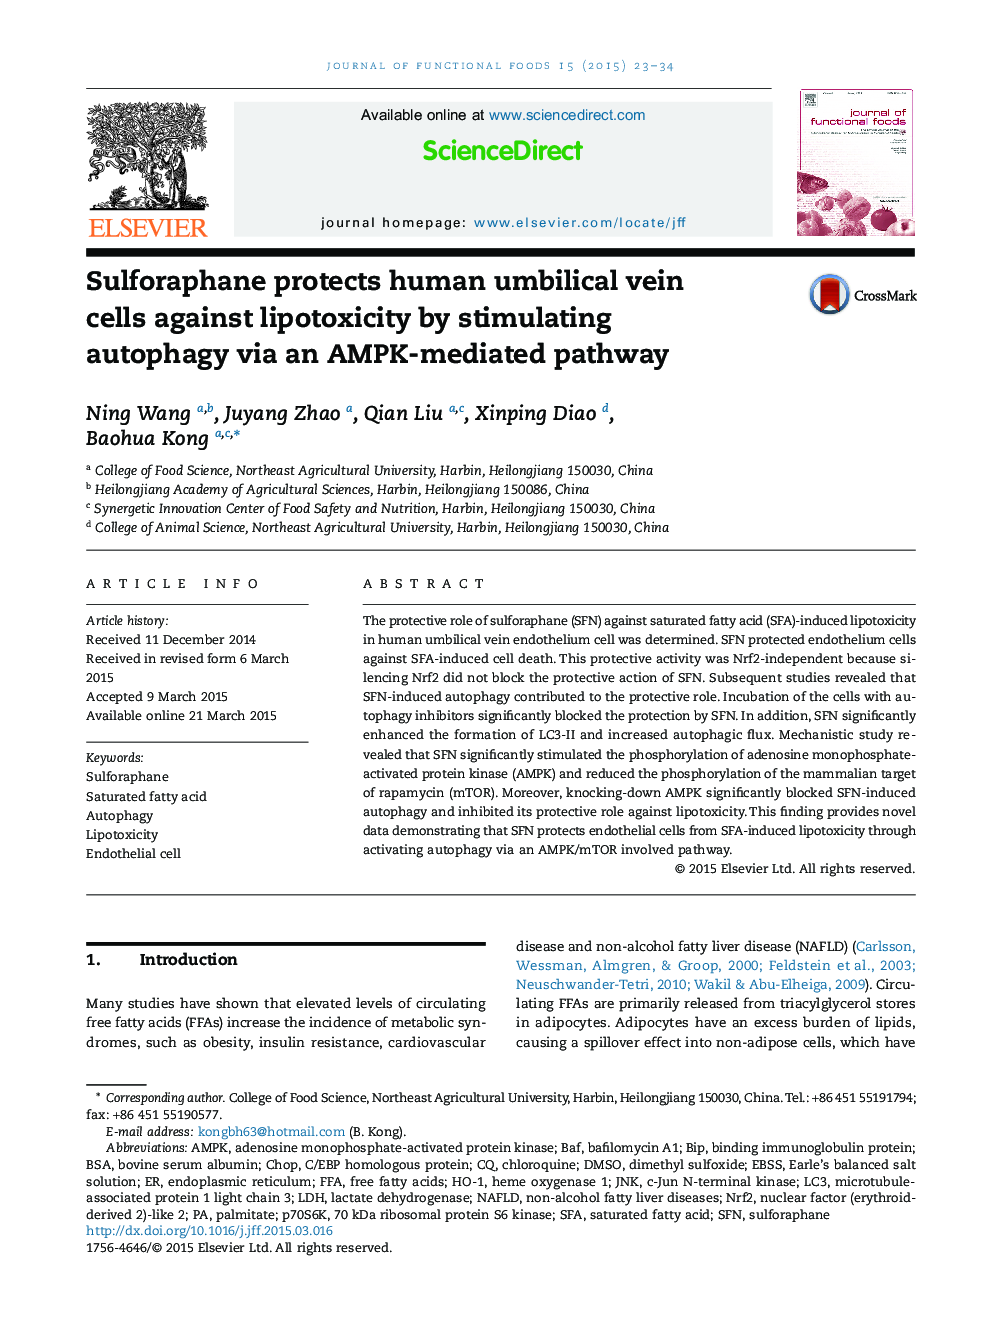 Sulforaphane protects human umbilical vein cells against lipotoxicity by stimulating autophagy via an AMPK-mediated pathway